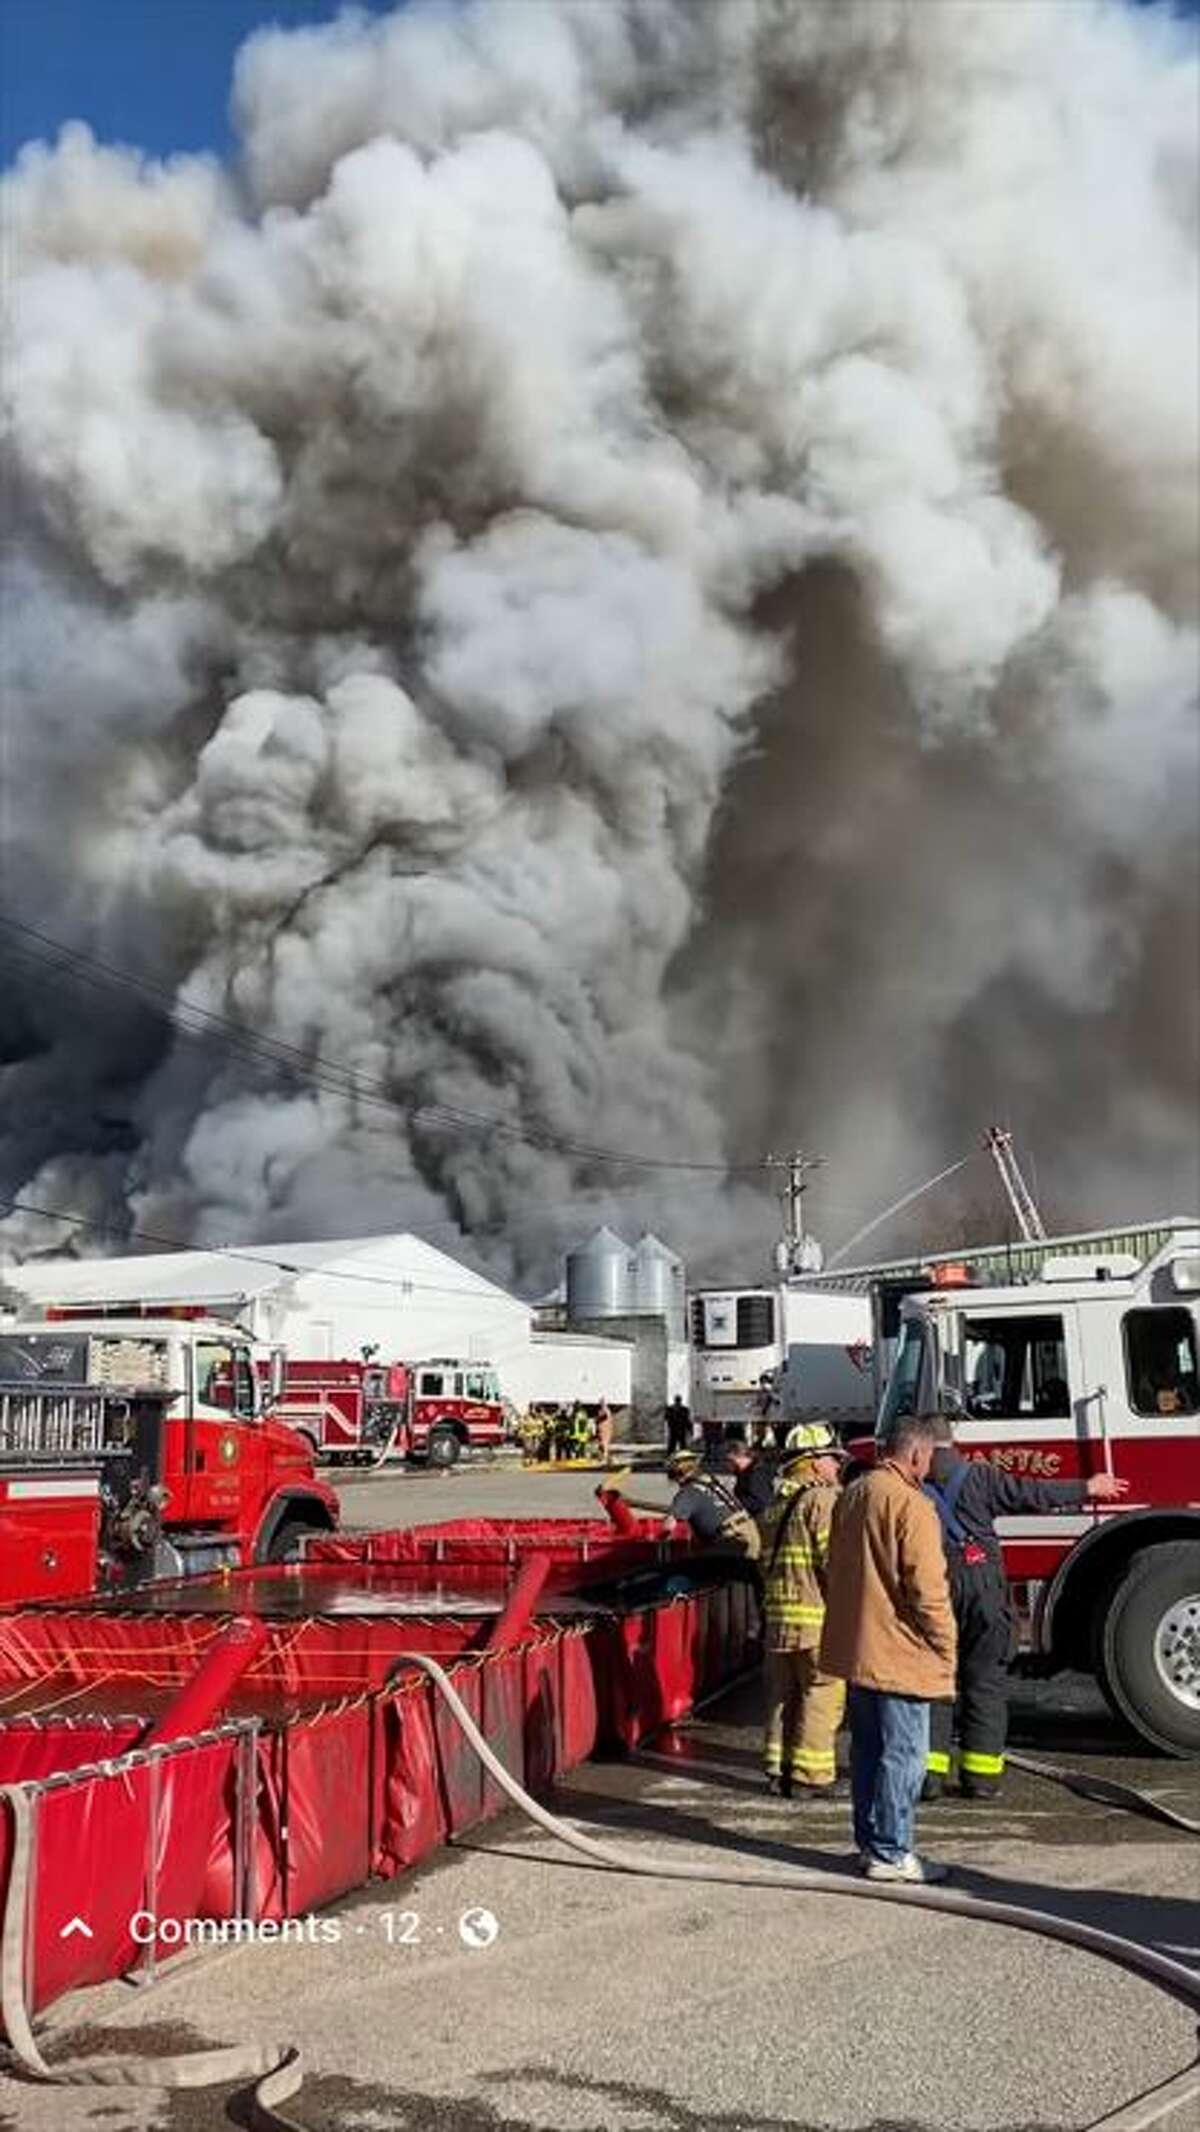 About 100,000 chickens killed in Bozrah egg farm fire, official says